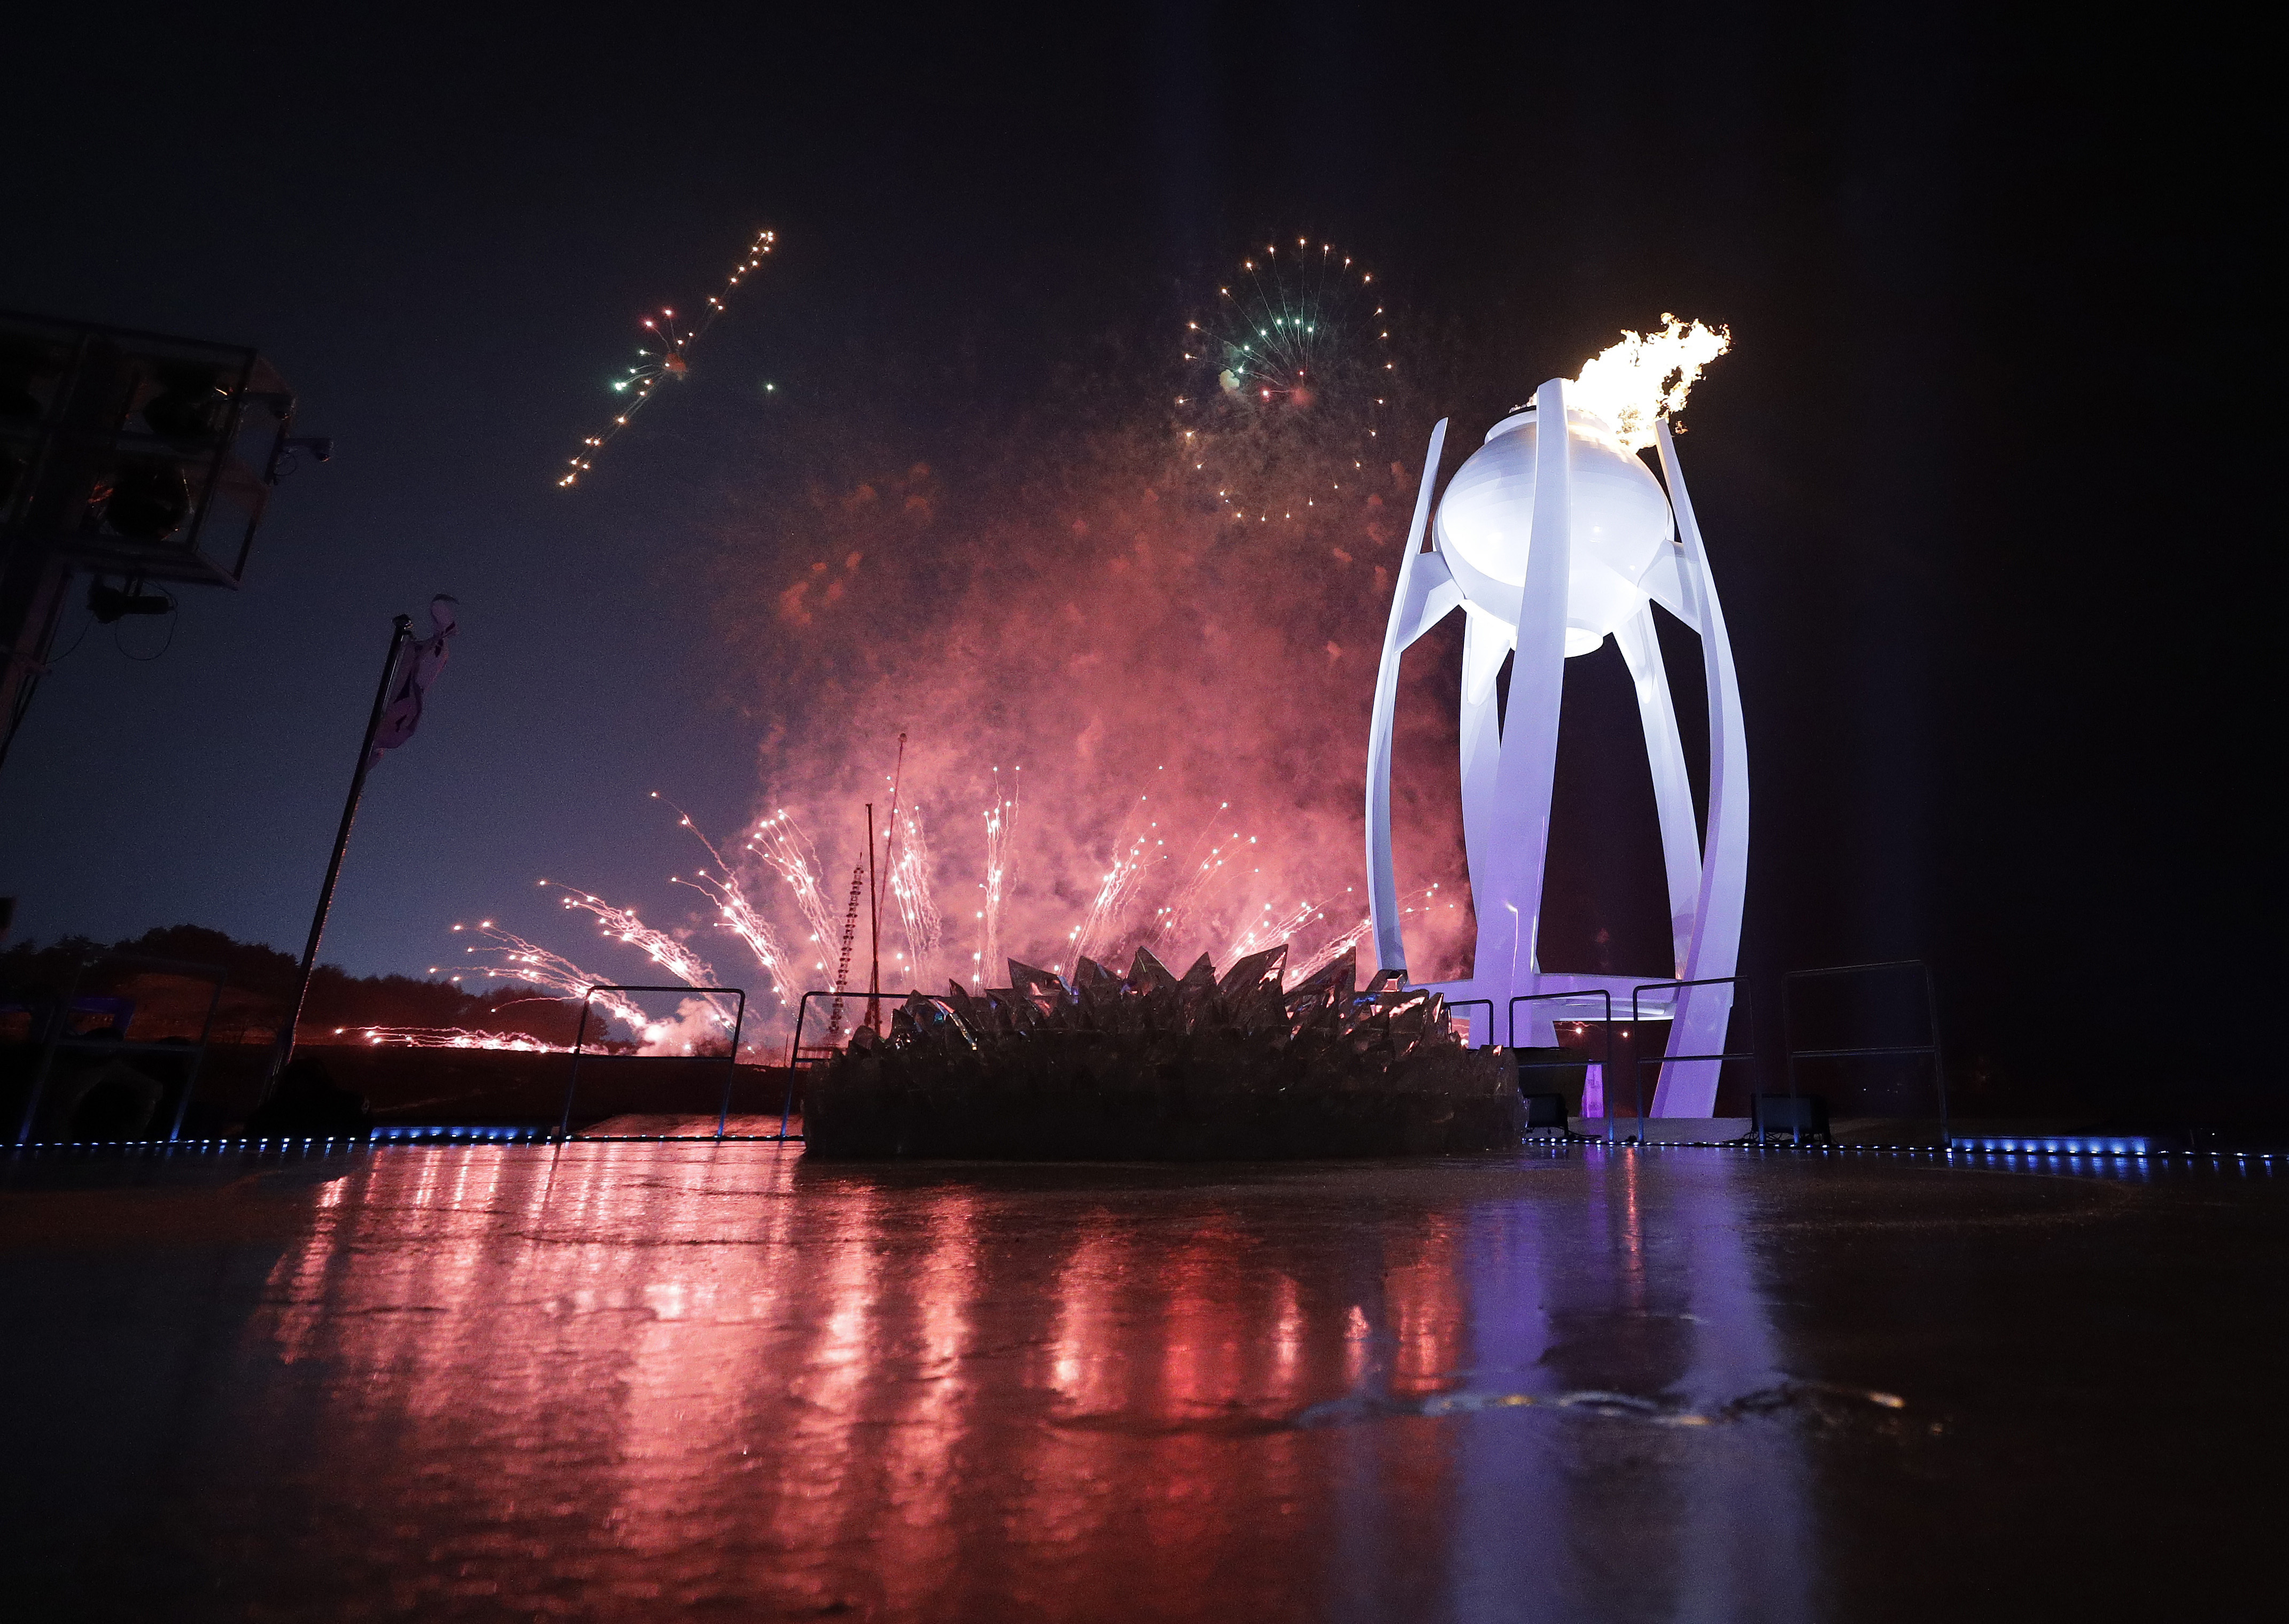 Fireworks behind the Olympic flame during the opening ceremony of the 2018 Winter Olympics at Pyeongchang